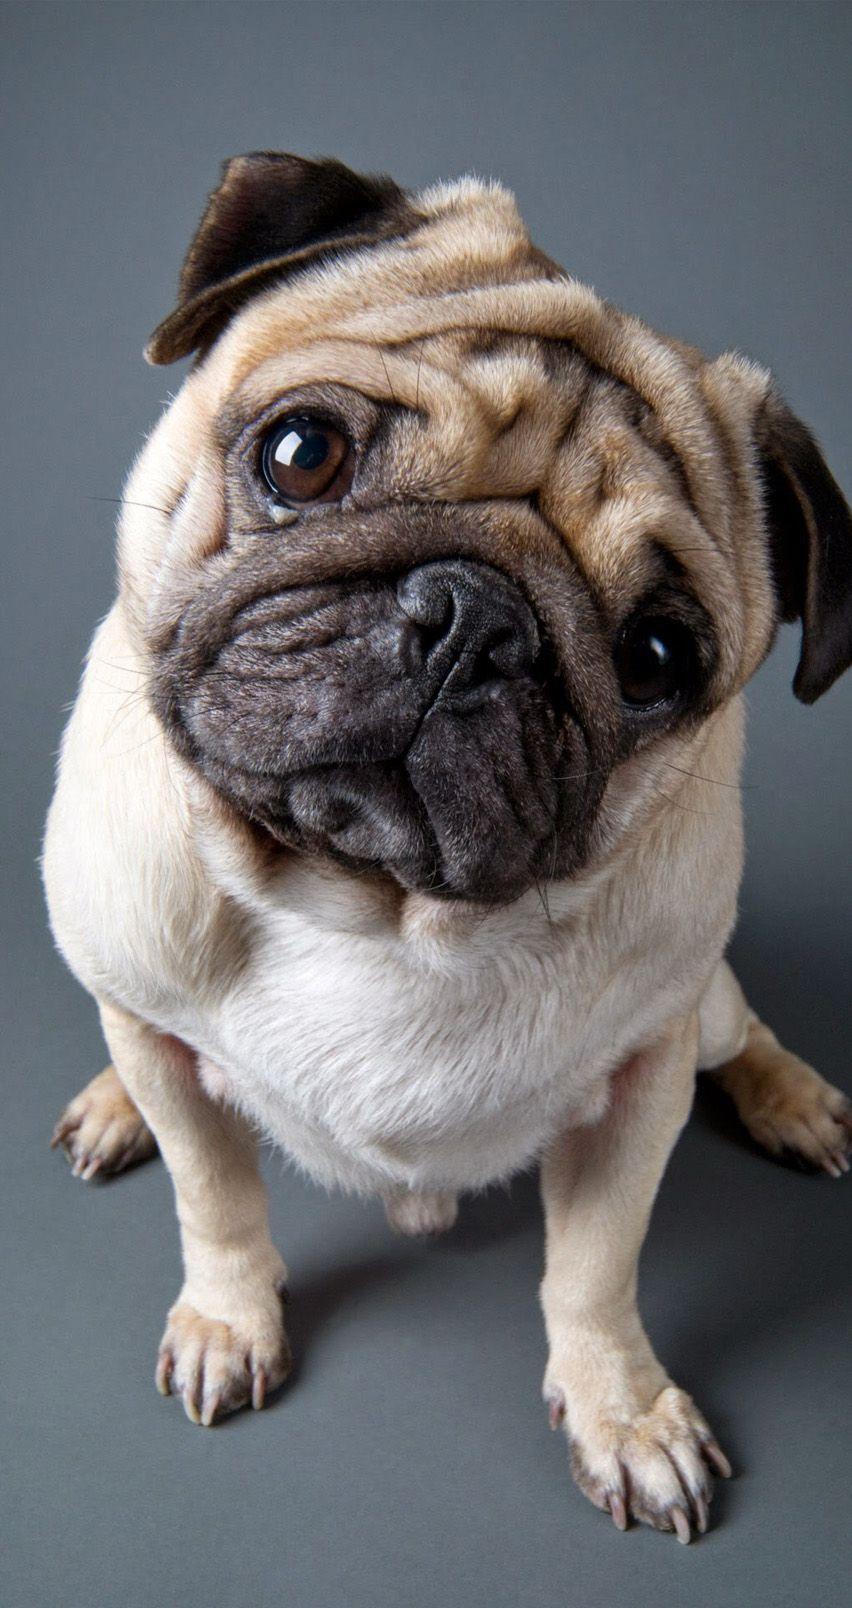 Cute pug 852 x 1608 Wallpaper available for free download